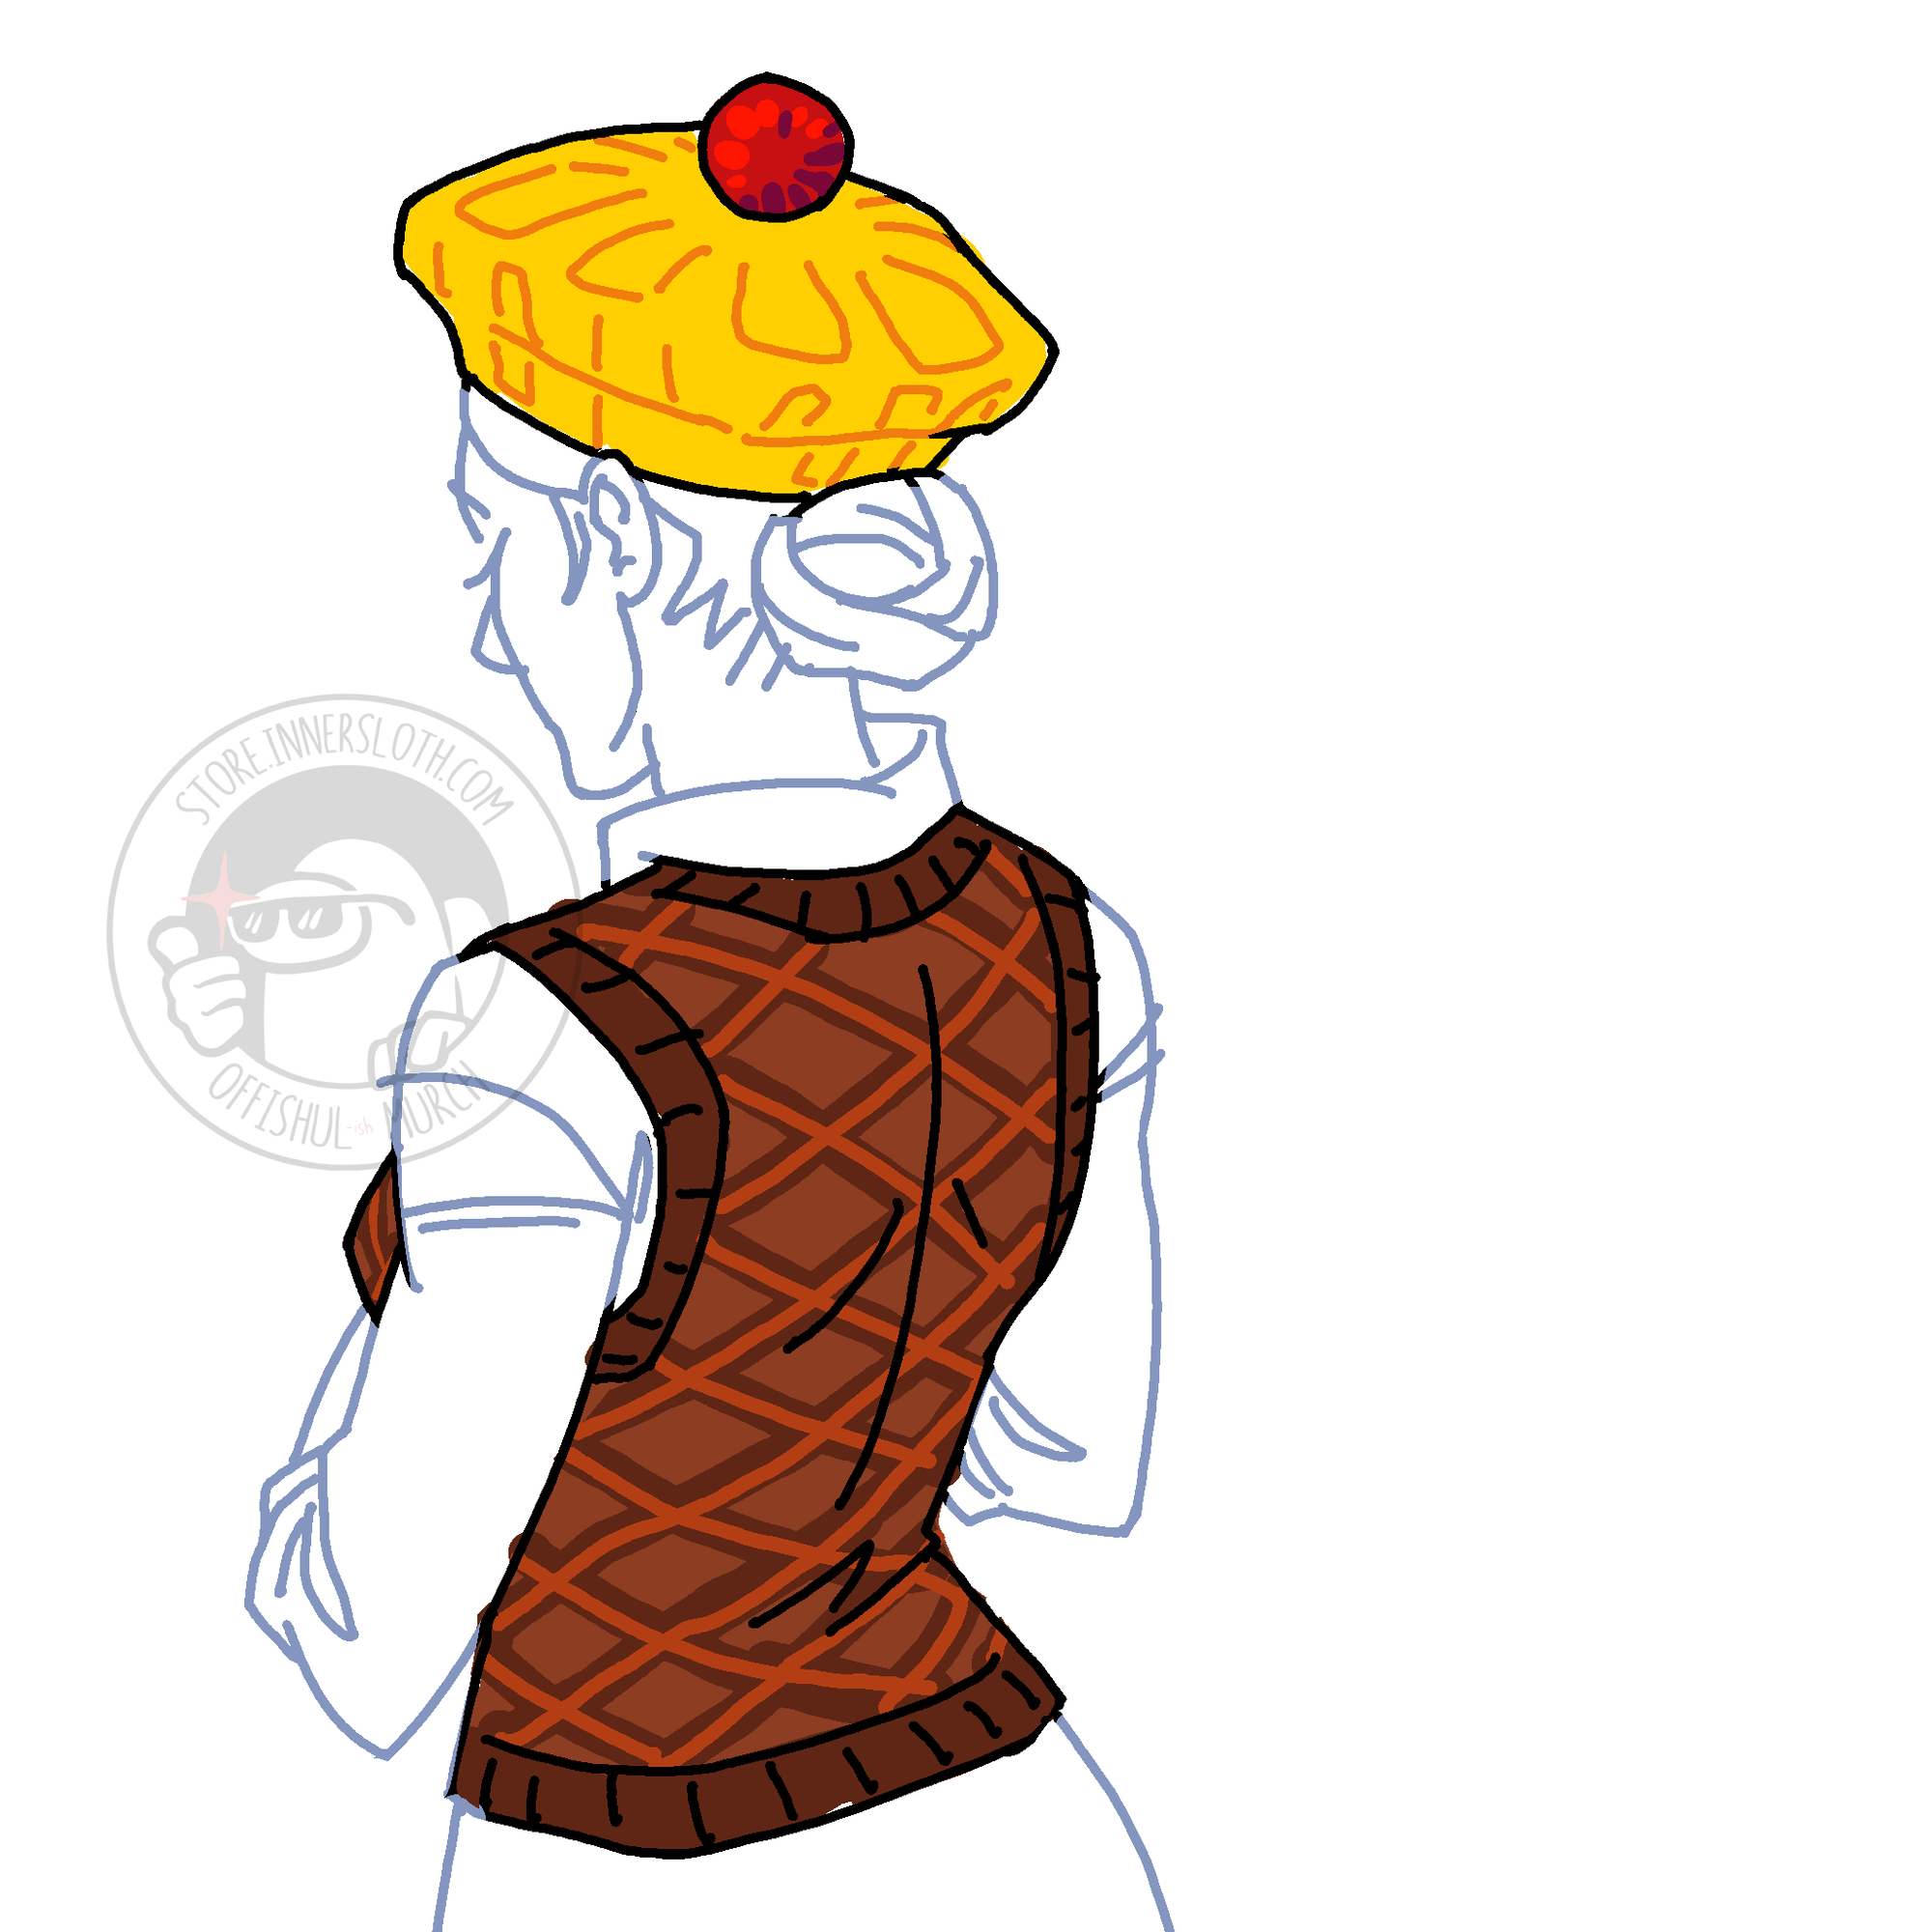 An illustration of the Holiday Hammy Drip Set by Jemma Salume.  A light blue sketch of a person wears both components, a hat and a vest. The hat is a yellow beret meant to emulate pineapple with a cherry pom-pom on top in the middle. The vest has dark brown collar, sleeve openings, and waistband while the garment itself is a lighter brown. The vest has a banded texture so as to emulate a ham rind.